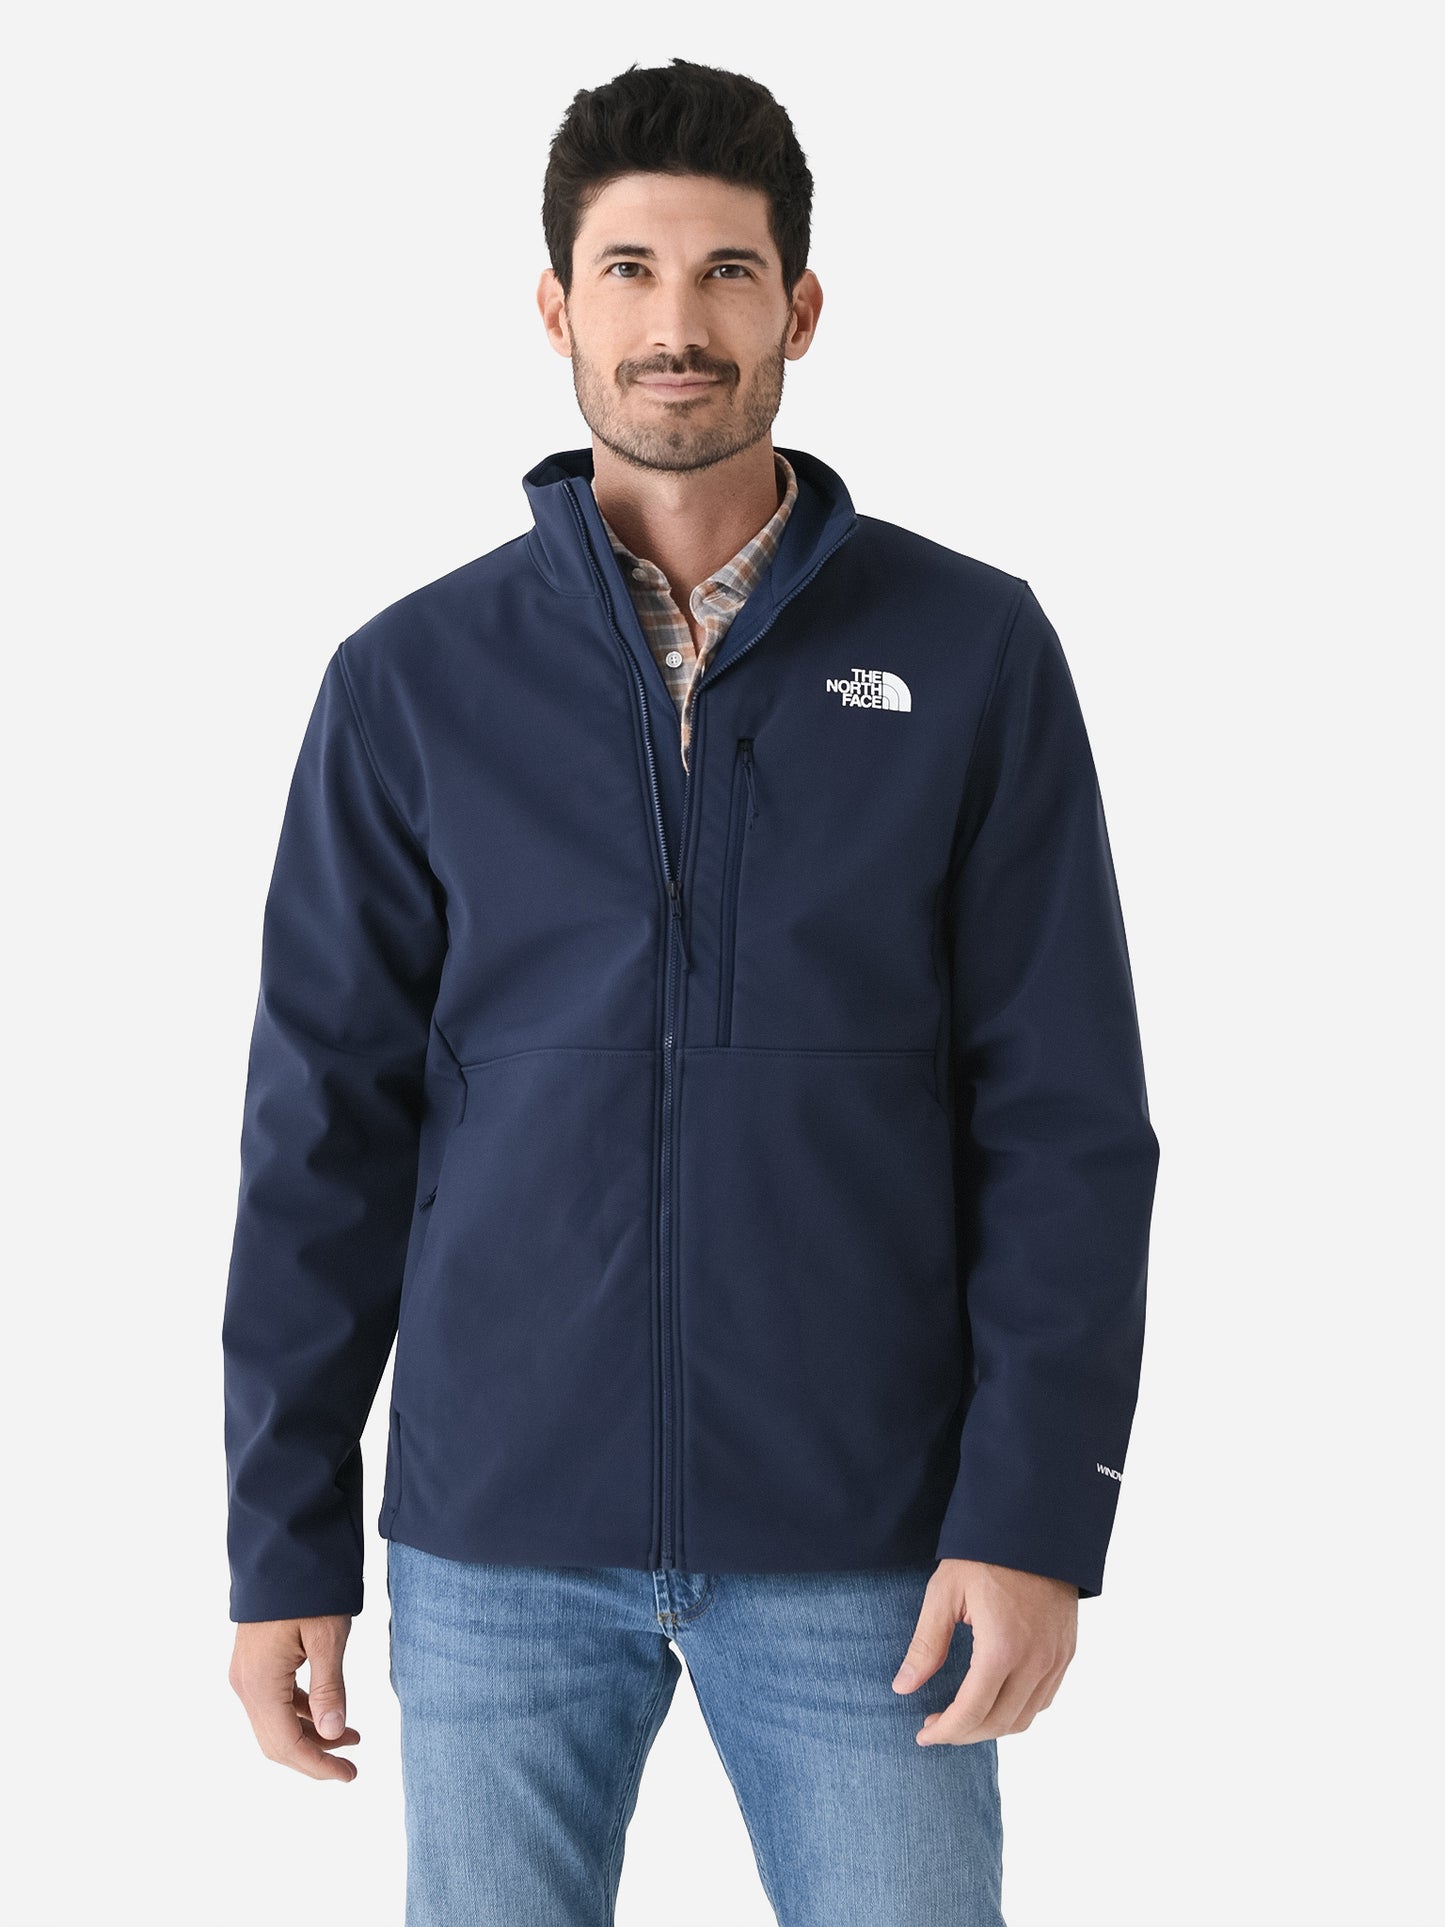 The North Face Men’s Apex Bionic 3 Jacket